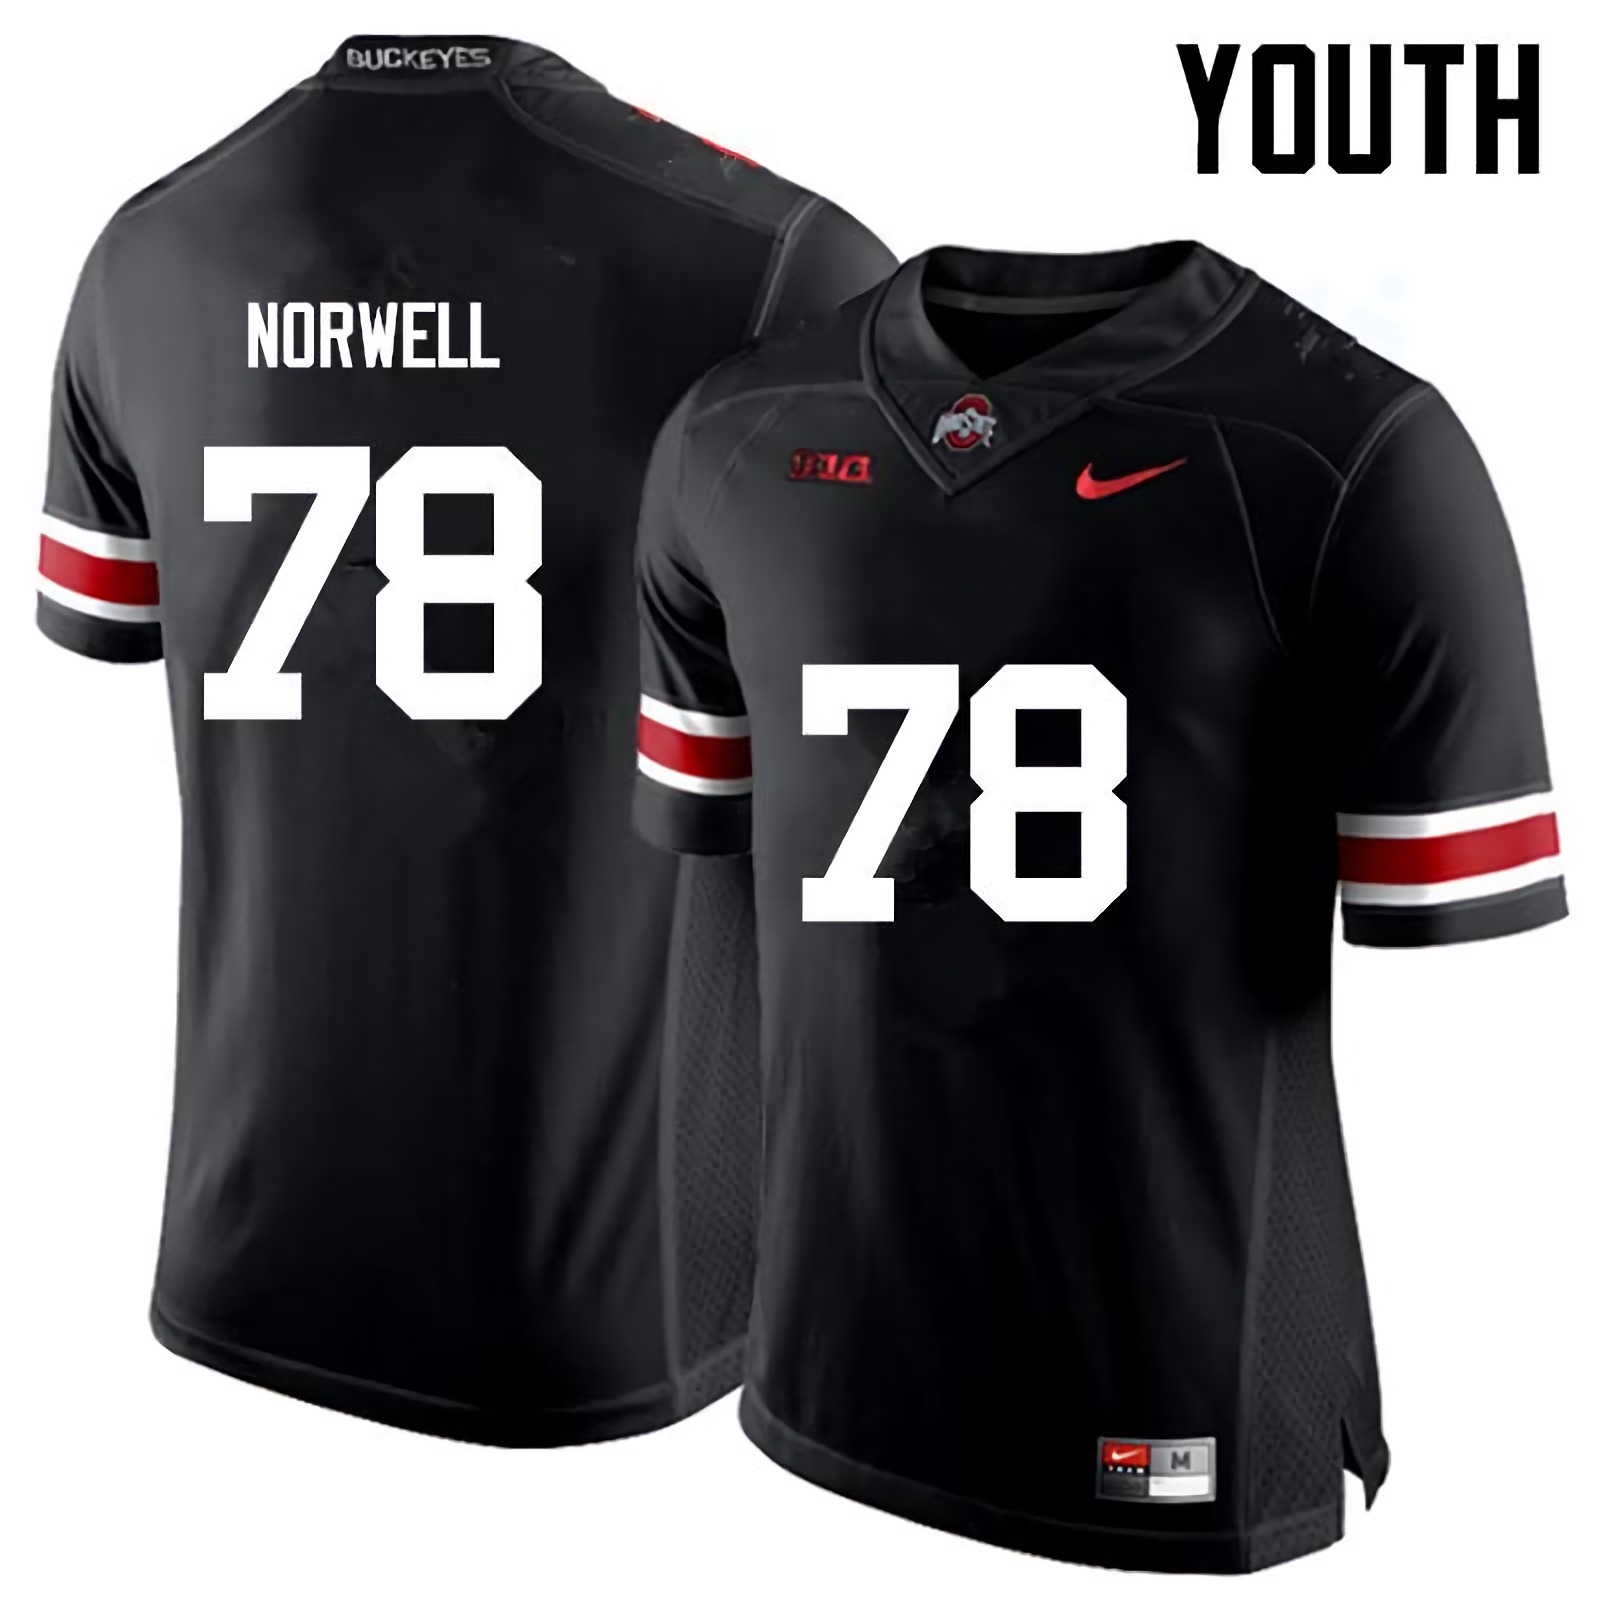 Andrew Norwell Ohio State Buckeyes Youth NCAA #78 Nike Black College Stitched Football Jersey XFI3456KP